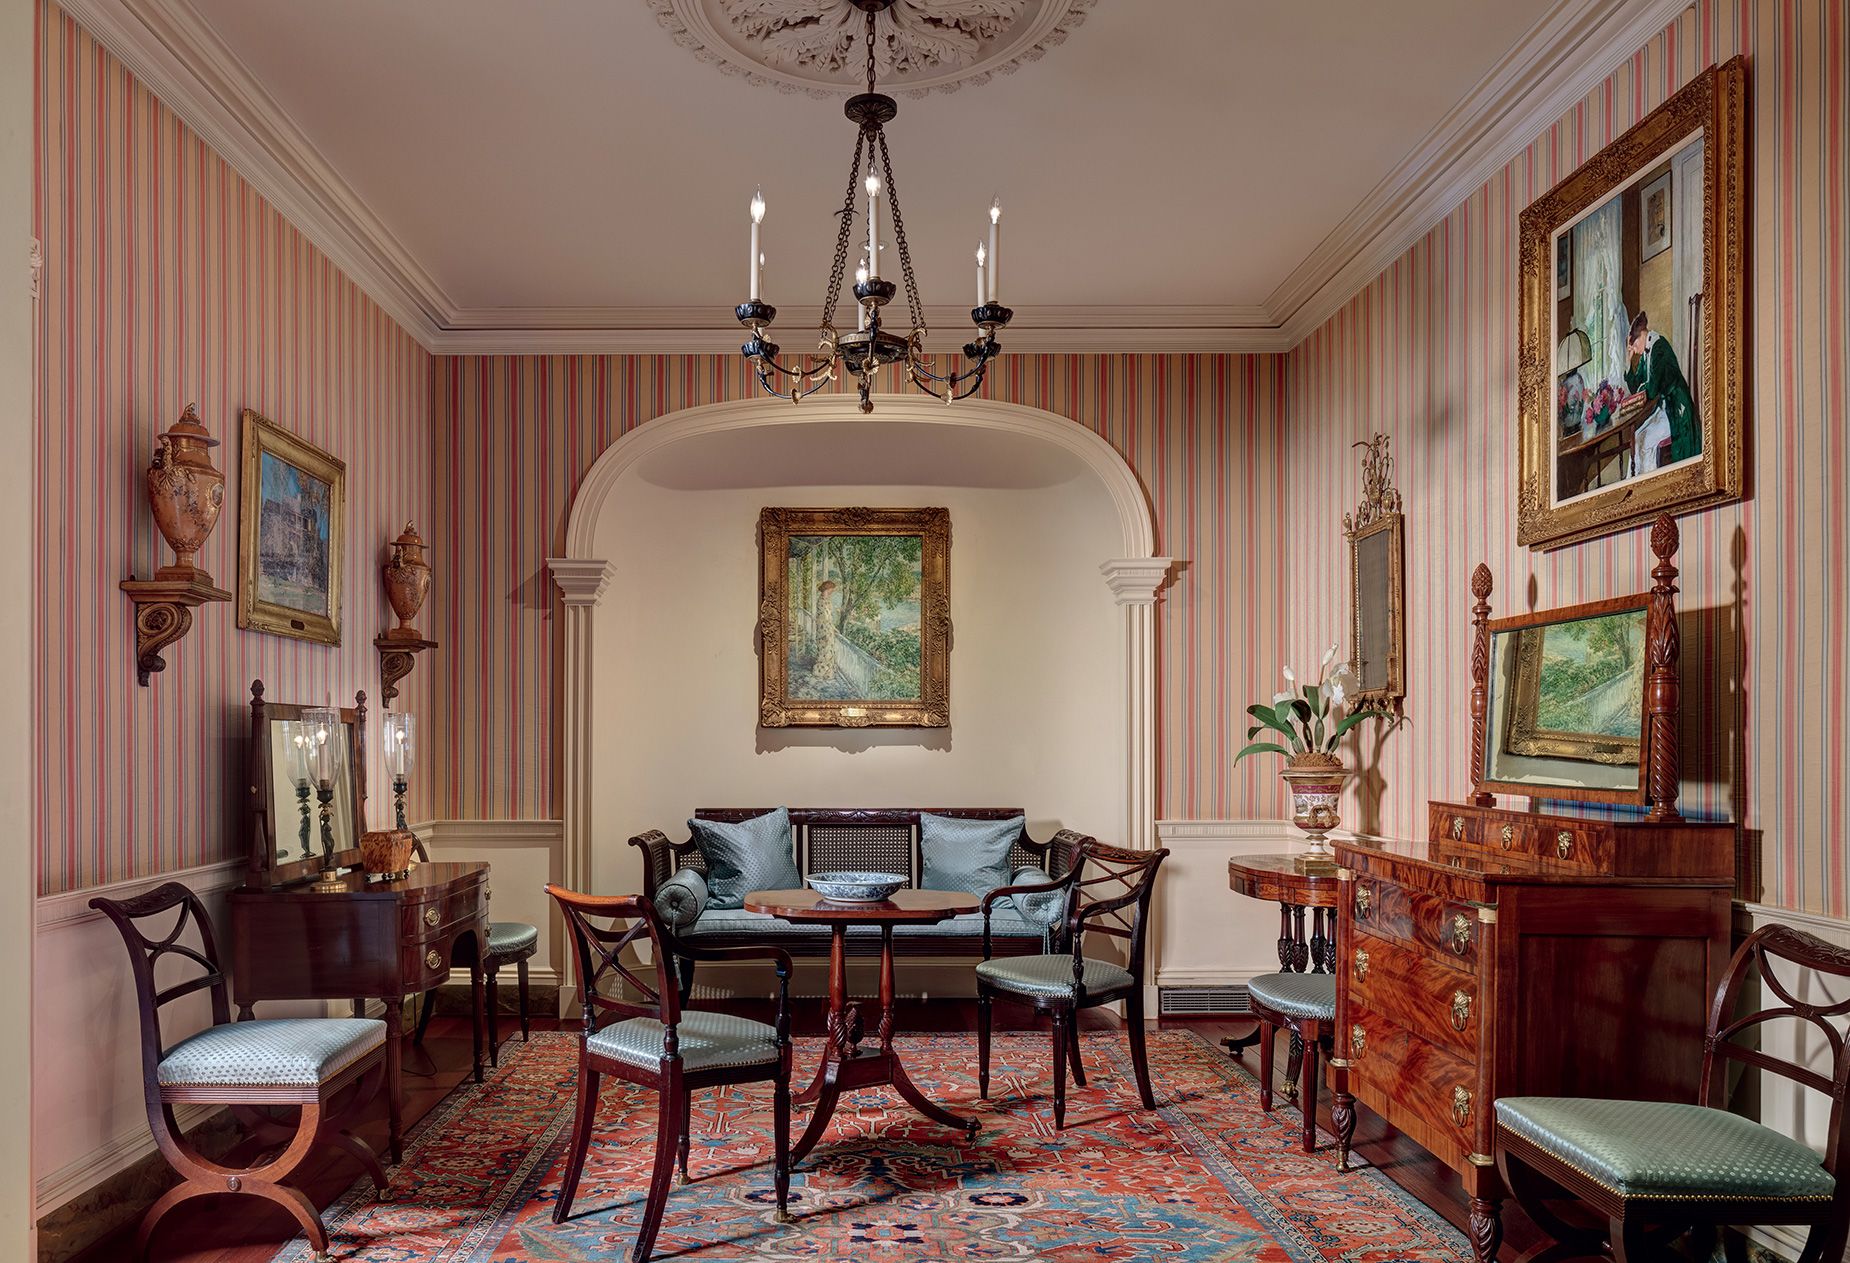 Bathed in soft white light, the walls in the Dolley Madison Powder Room are covered by elegant silk wallpaper in a pink, creme and light blue color scheme. However, while the room's furniture dates to Madison's time, most of the paintings depart from that era — late 19th-century works from American impressionists Childe Hassam and Edmund C. Tarbell are on display.